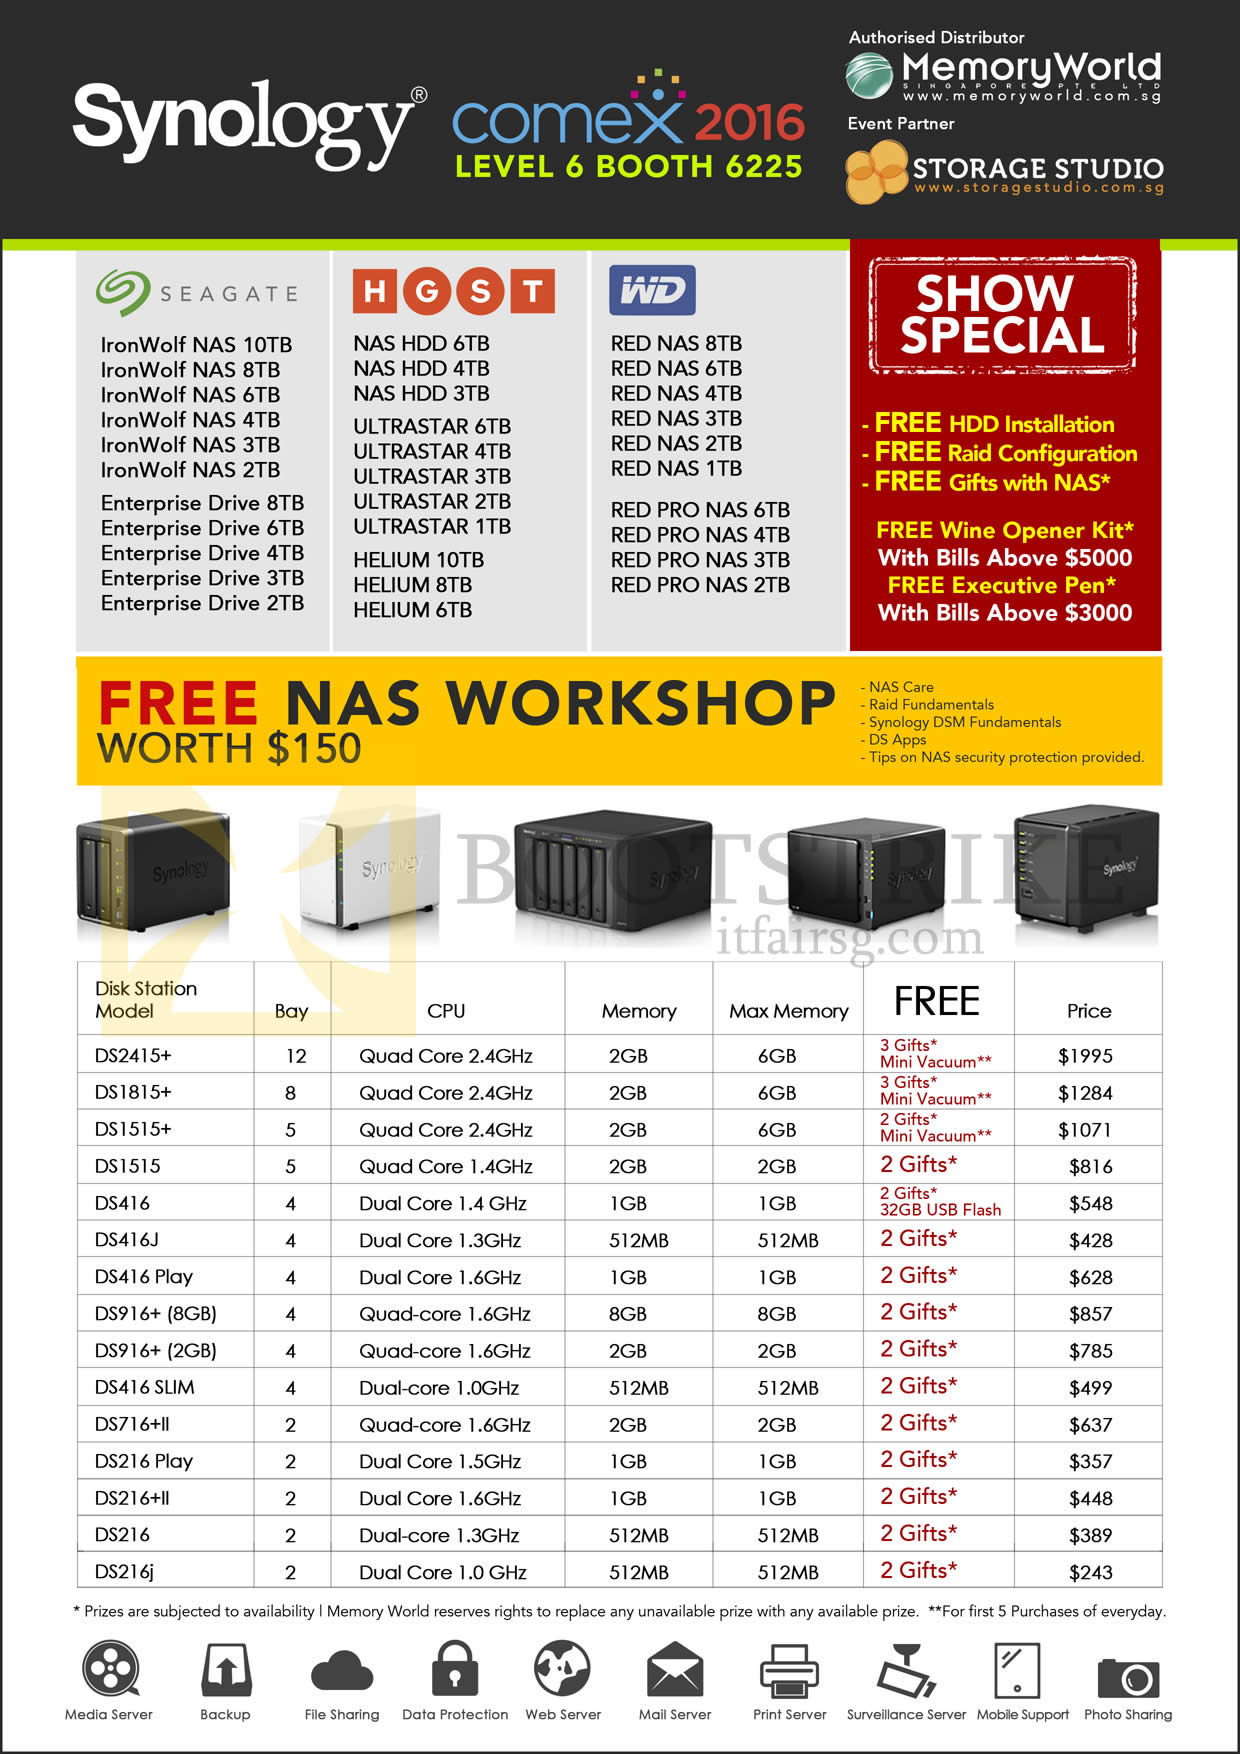 COMEX 2016 price list image brochure of Memory World Synology NAS Diskstation 2415, 1815, 1515, 416, 916, 716, 216, Play, Sum